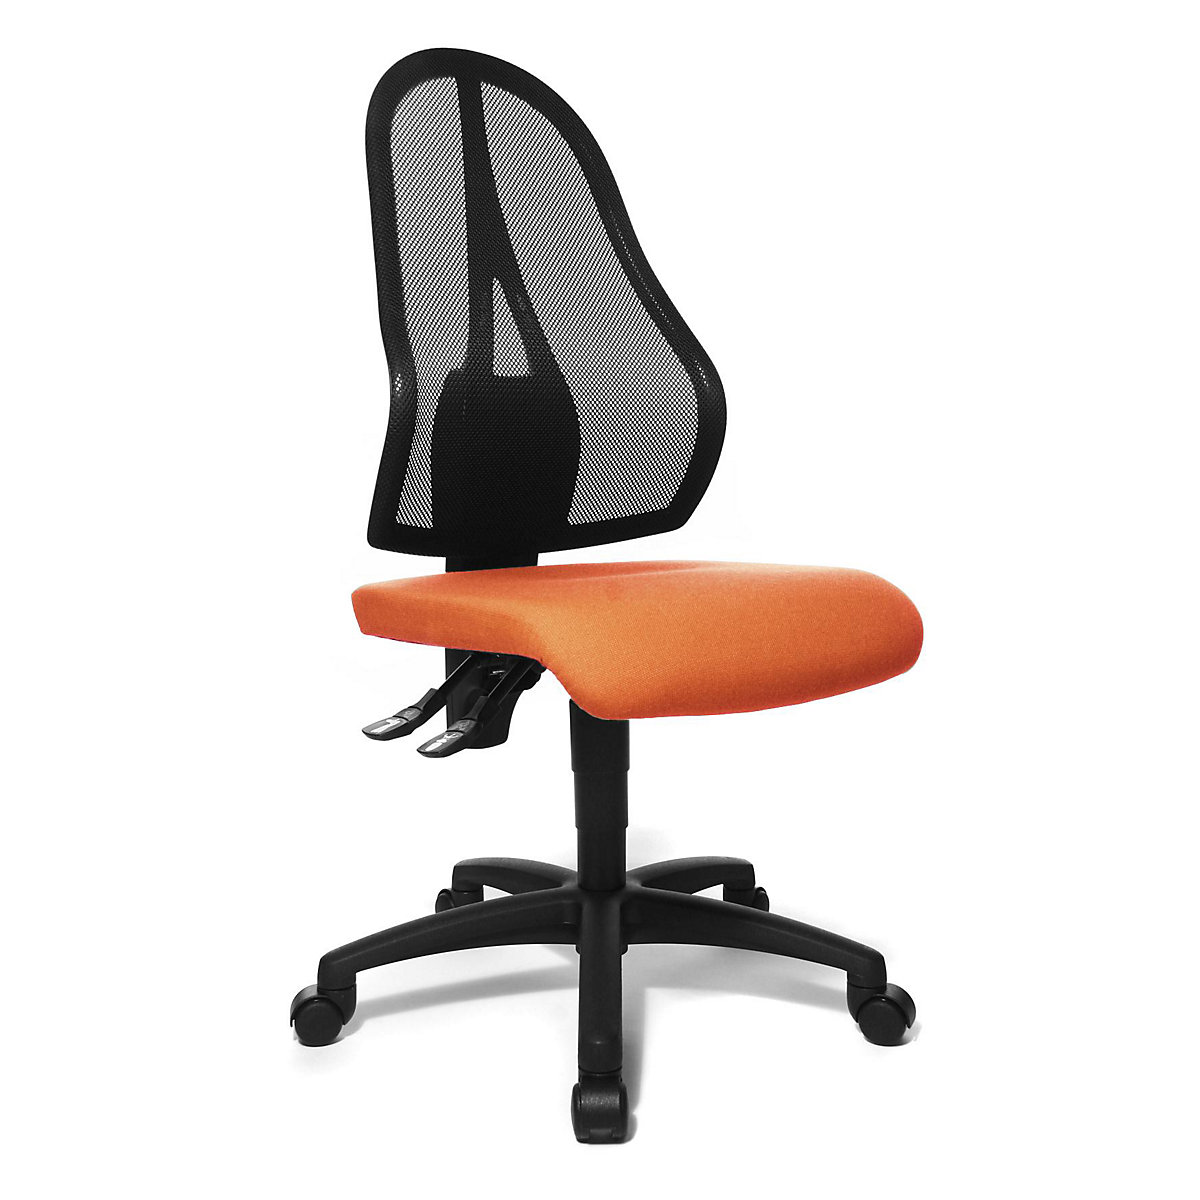 OPEN POINT P office swivel chair – Topstar, mesh back rest in black, without arm rests, orange seat cover-2